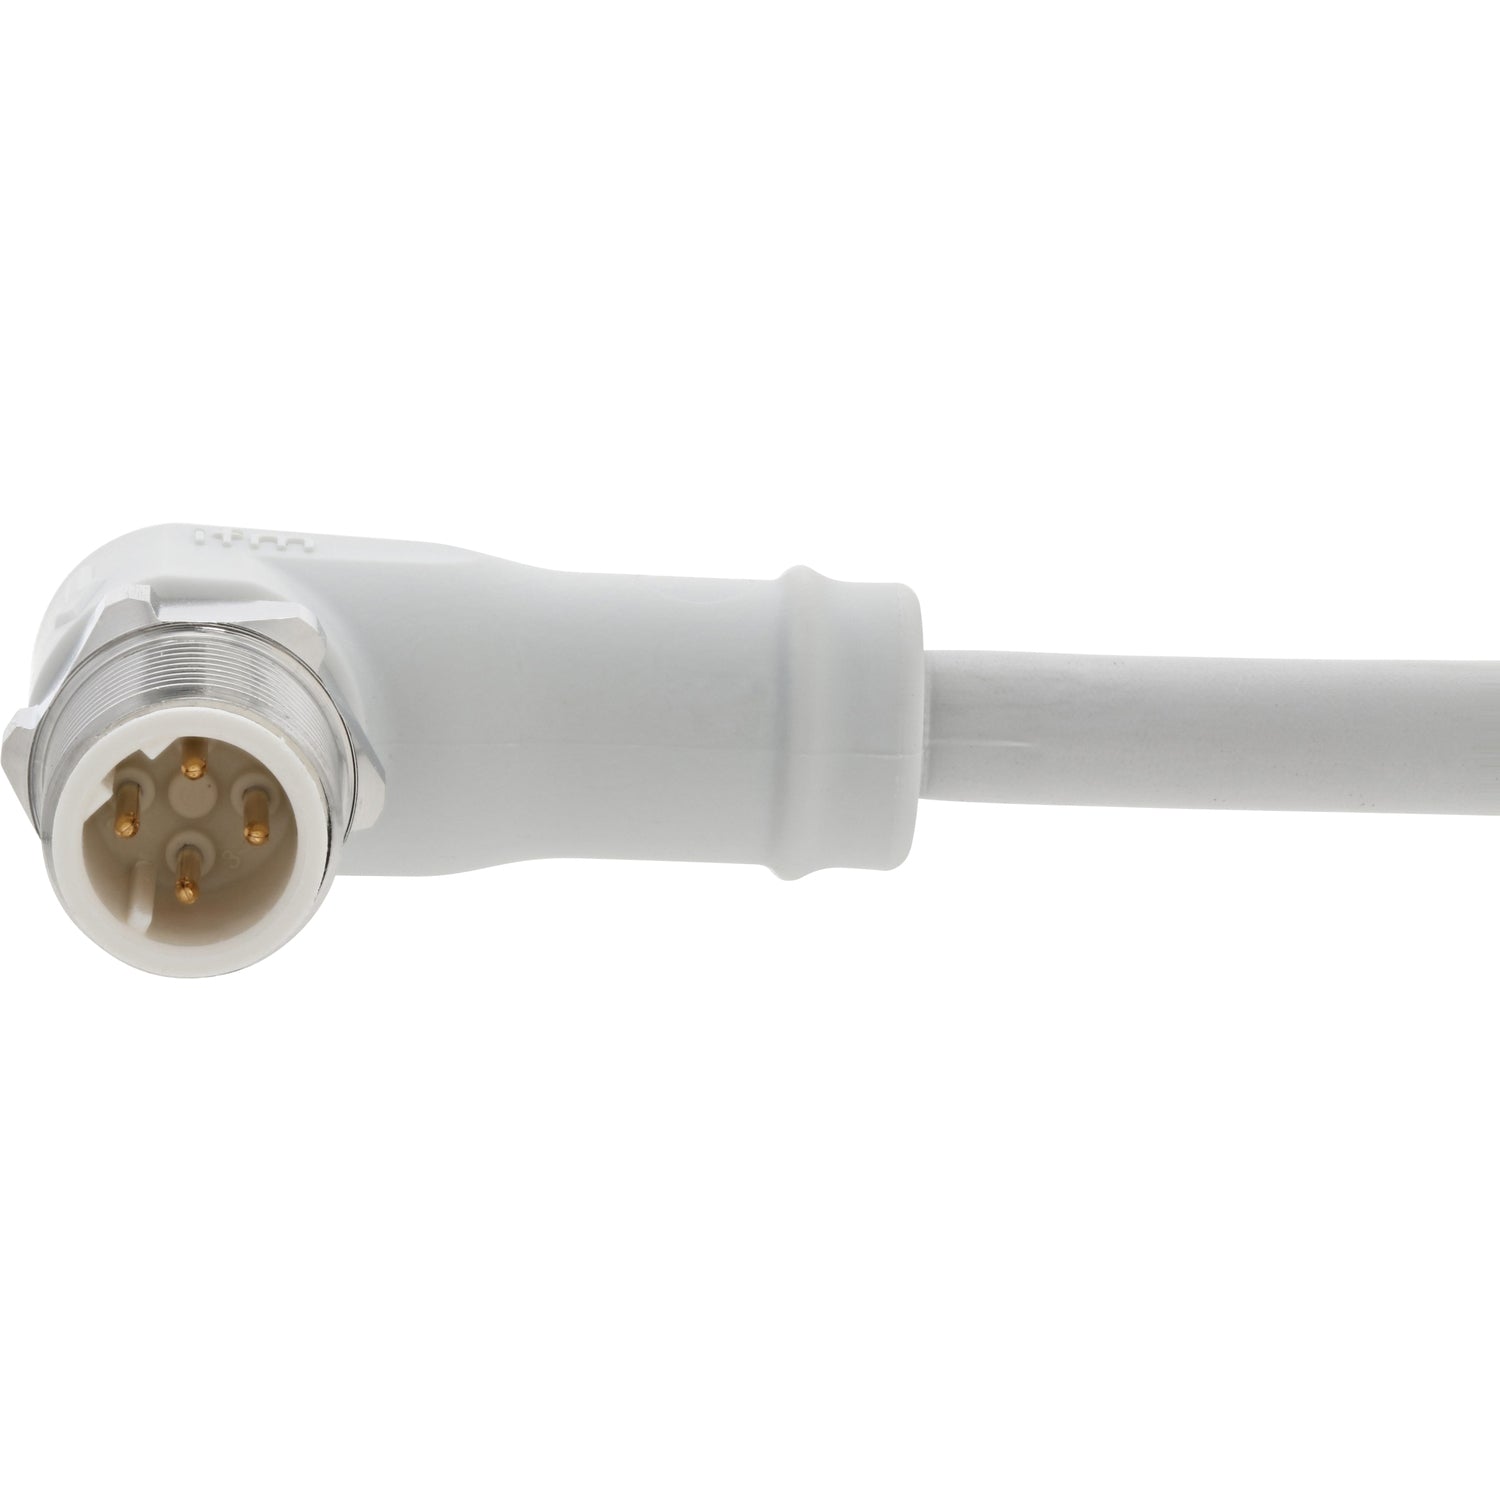 White coiled Ethernet connection cable with 90 degree molded ends on white background.